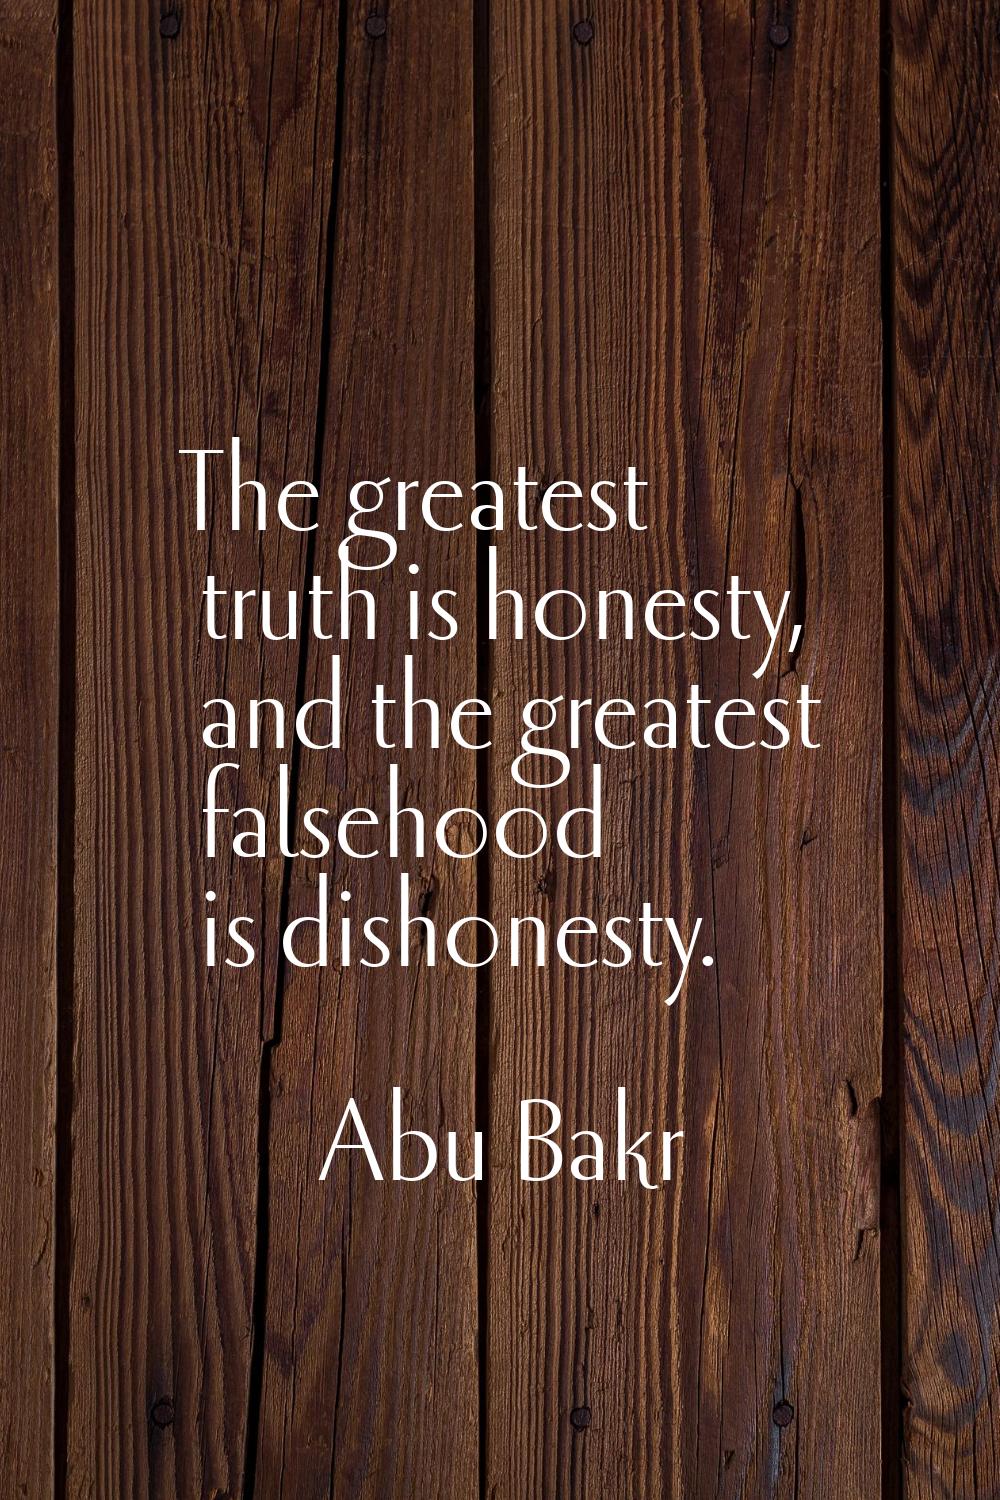 The greatest truth is honesty, and the greatest falsehood is dishonesty.